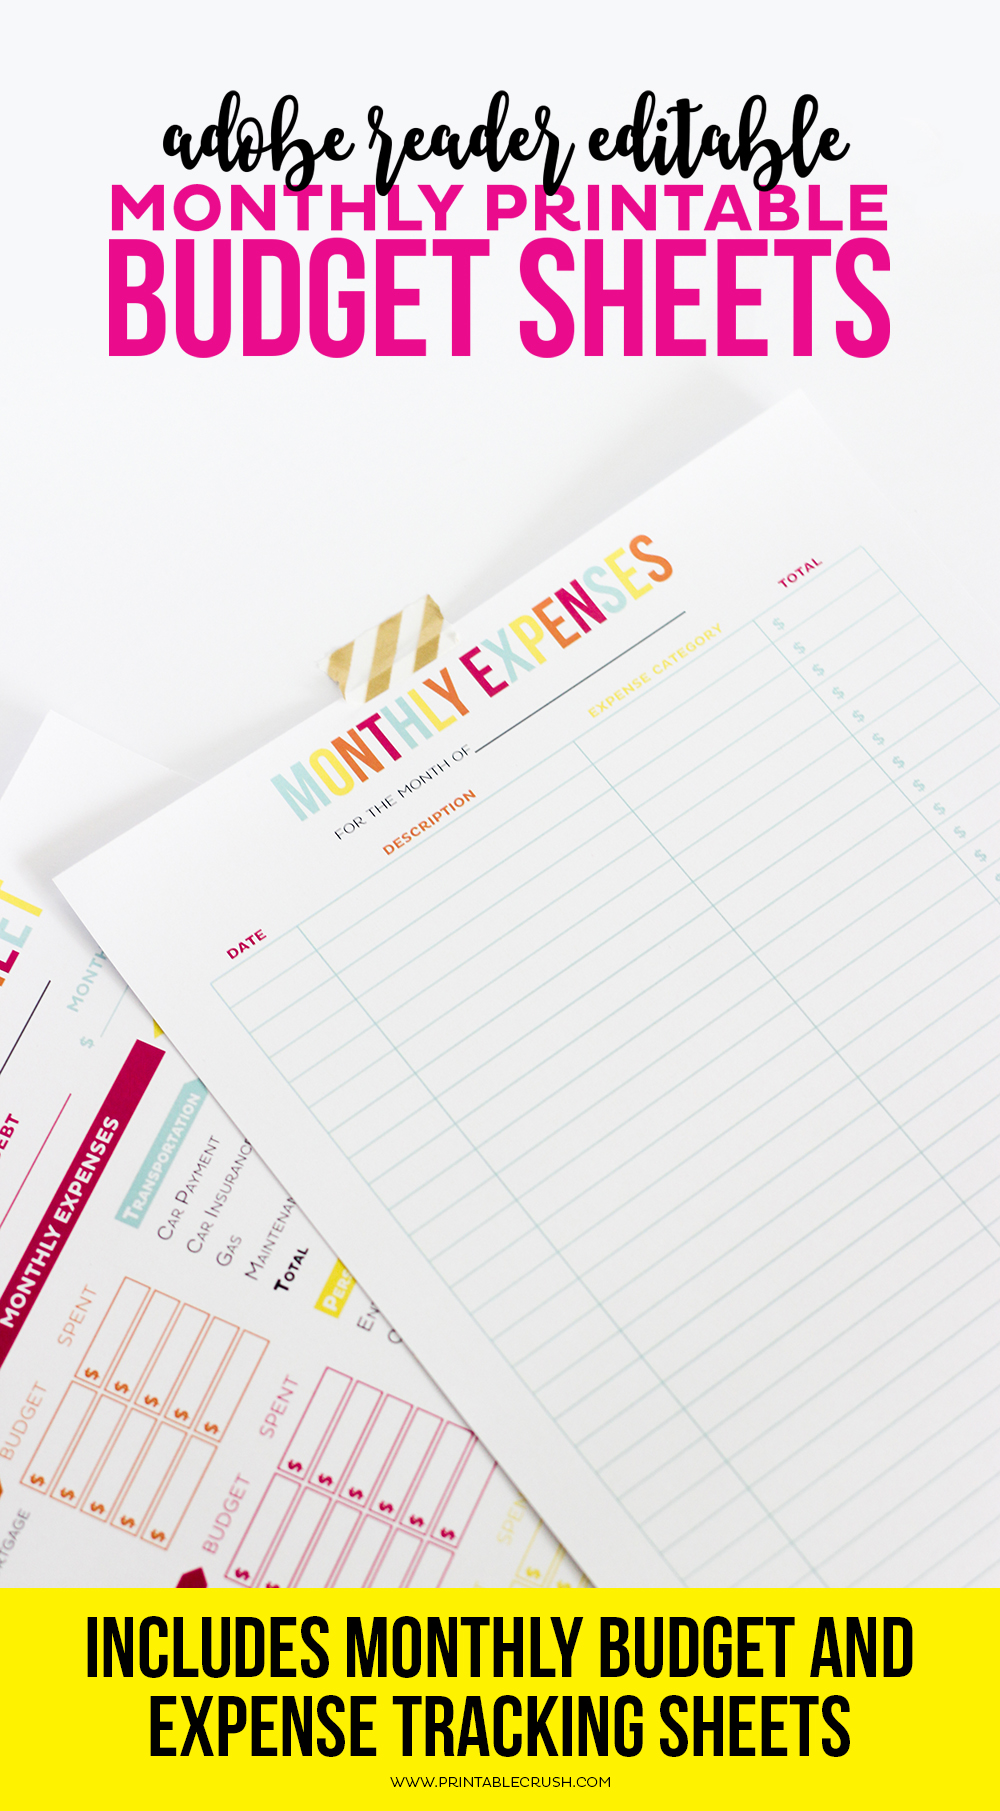 Get your finances in order with these Editable Printable Budget Sheets! Includes monthly budget and expense sheets so you can easily keep track of your money!